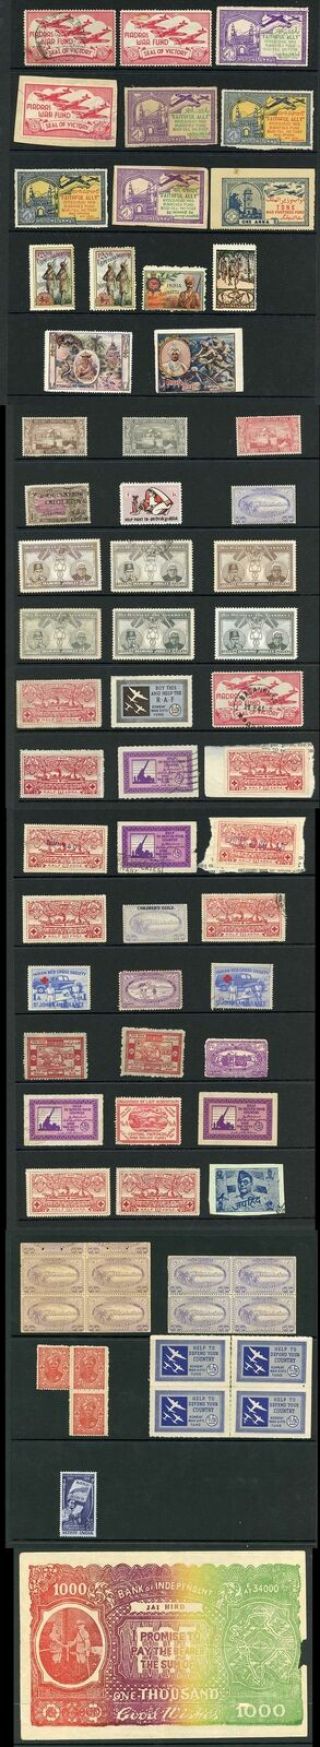 India Selection Of Red Cross Labels Plus Others (68 Stamps)